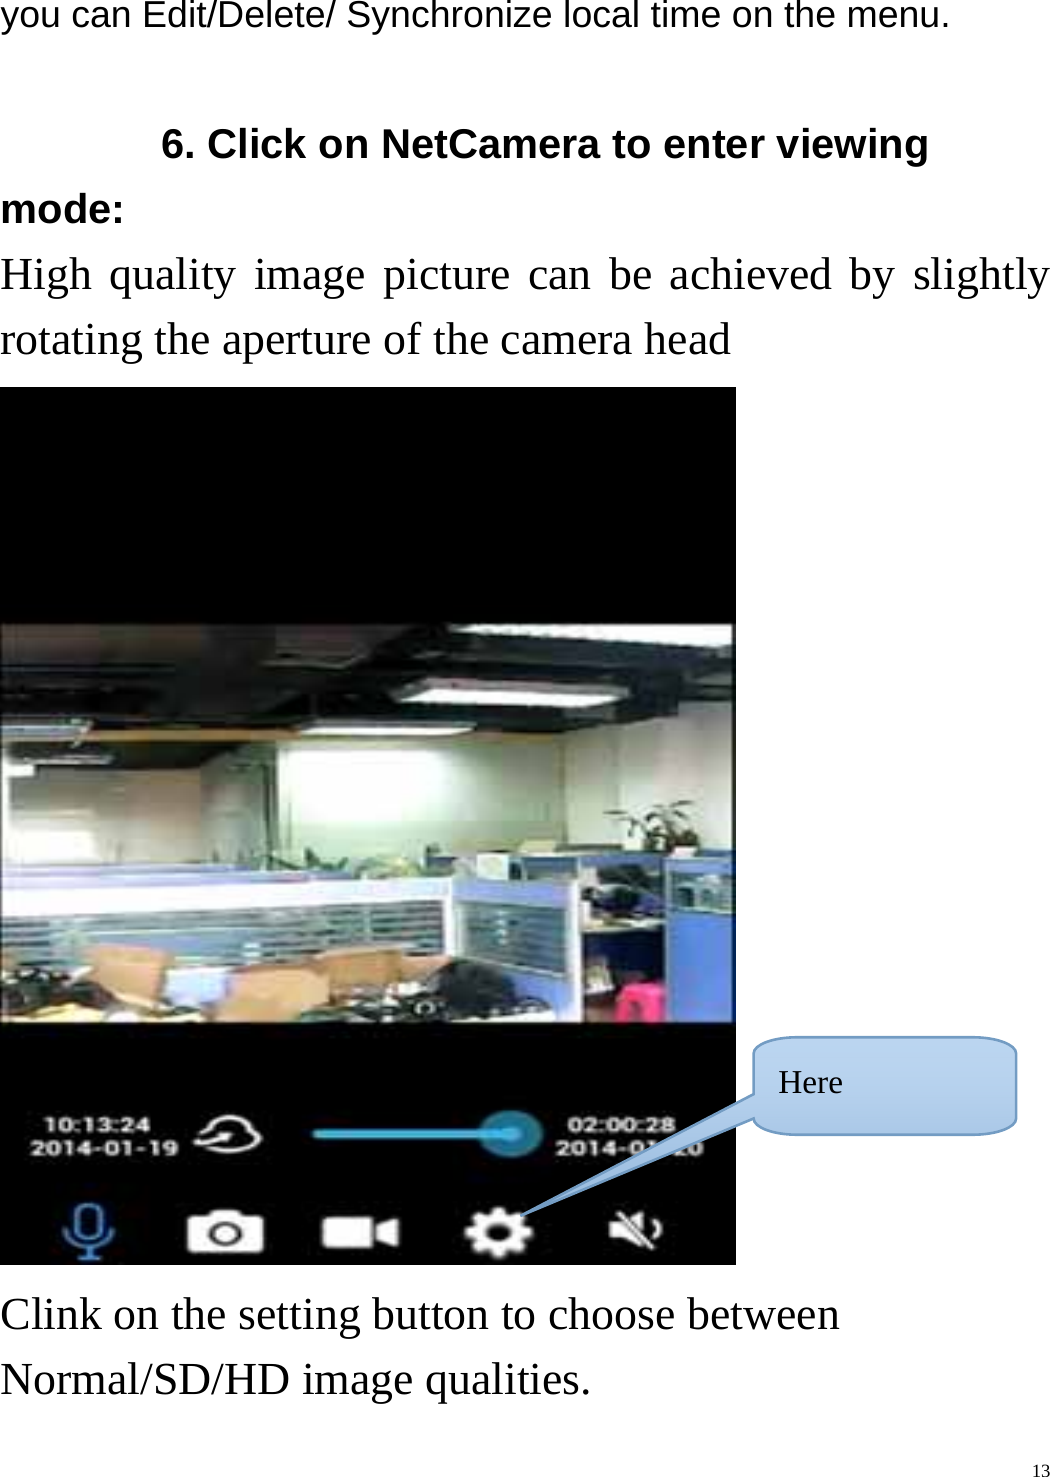    13you can Edit/Delete/ Synchronize local time on the menu.         6. Click on NetCamera to enter viewing mode: High quality image picture can be achieved by slightly rotating the aperture of the camera head  Clink on the setting button to choose between Normal/SD/HD image qualities. Here 